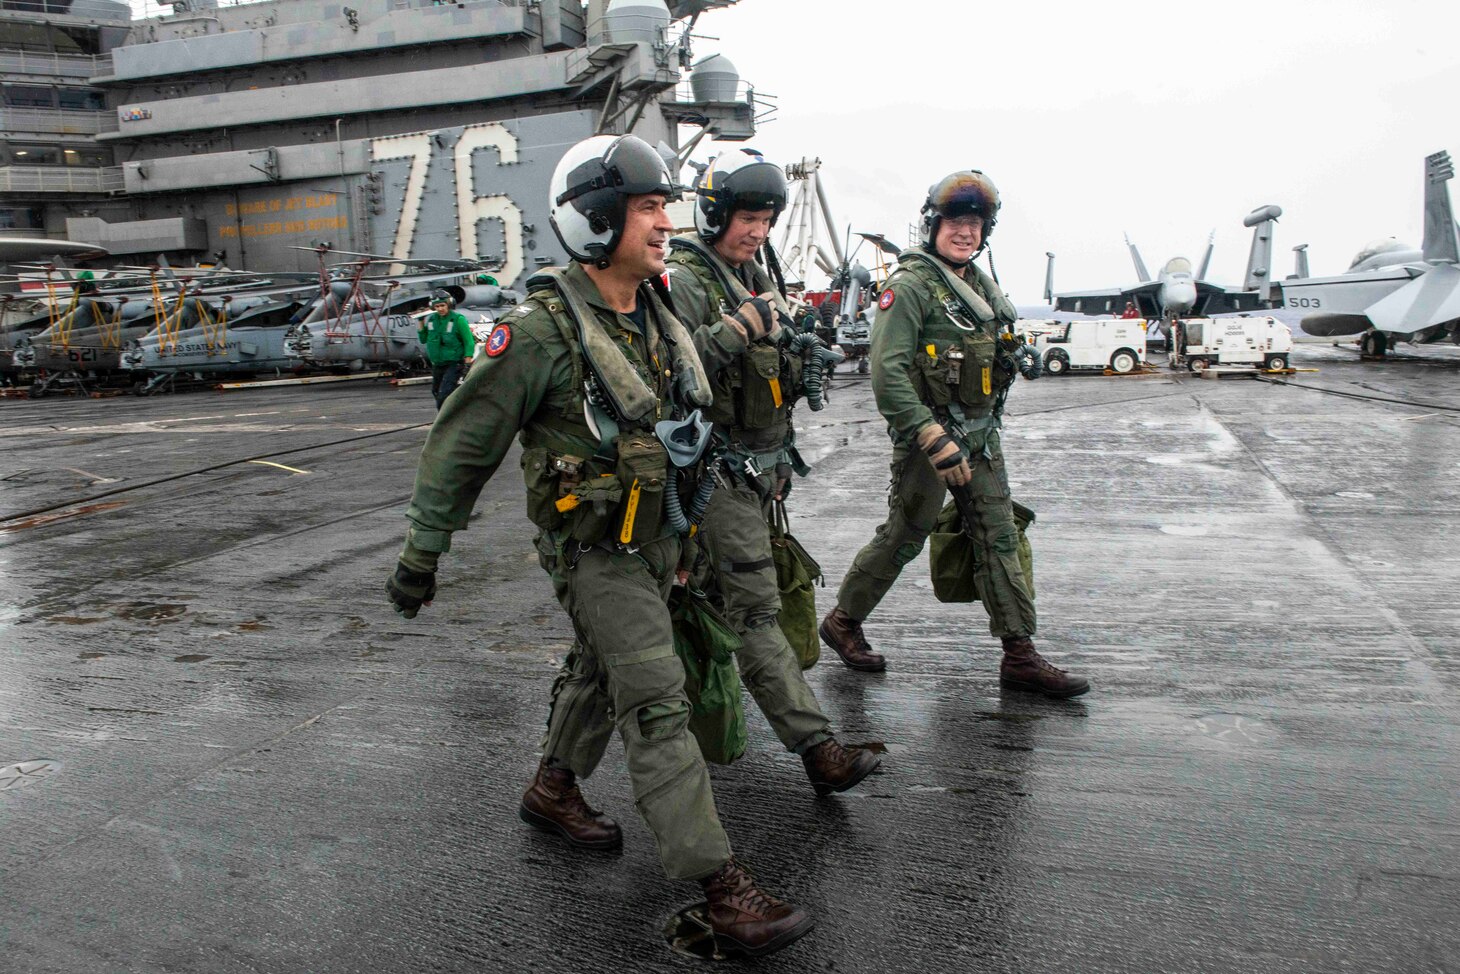 PHILIPPINE SEA (August 2, 2019) Capt. Forrest Young, left, and Capt. Michael Rovenolt, far right, Commander, Carrier Air Wing 5, walk away from their aircraft on the flight deck aboard the Navy’s forward-deployed aircraft carrier USS Ronald Reagan (CVN 76) after Carrier Air Wing 5’s (CVW 5) change of command ceremony. Young was relieved as commanding officer of Carrier Air Wing (CVW) 5 by Rovenolt. Ronald Reagan, the flagship of Carrier Strike Group 5, provides a combat-ready force that protects and defends the collective maritime interests of its allies and partners in the Indo-Pacific region.